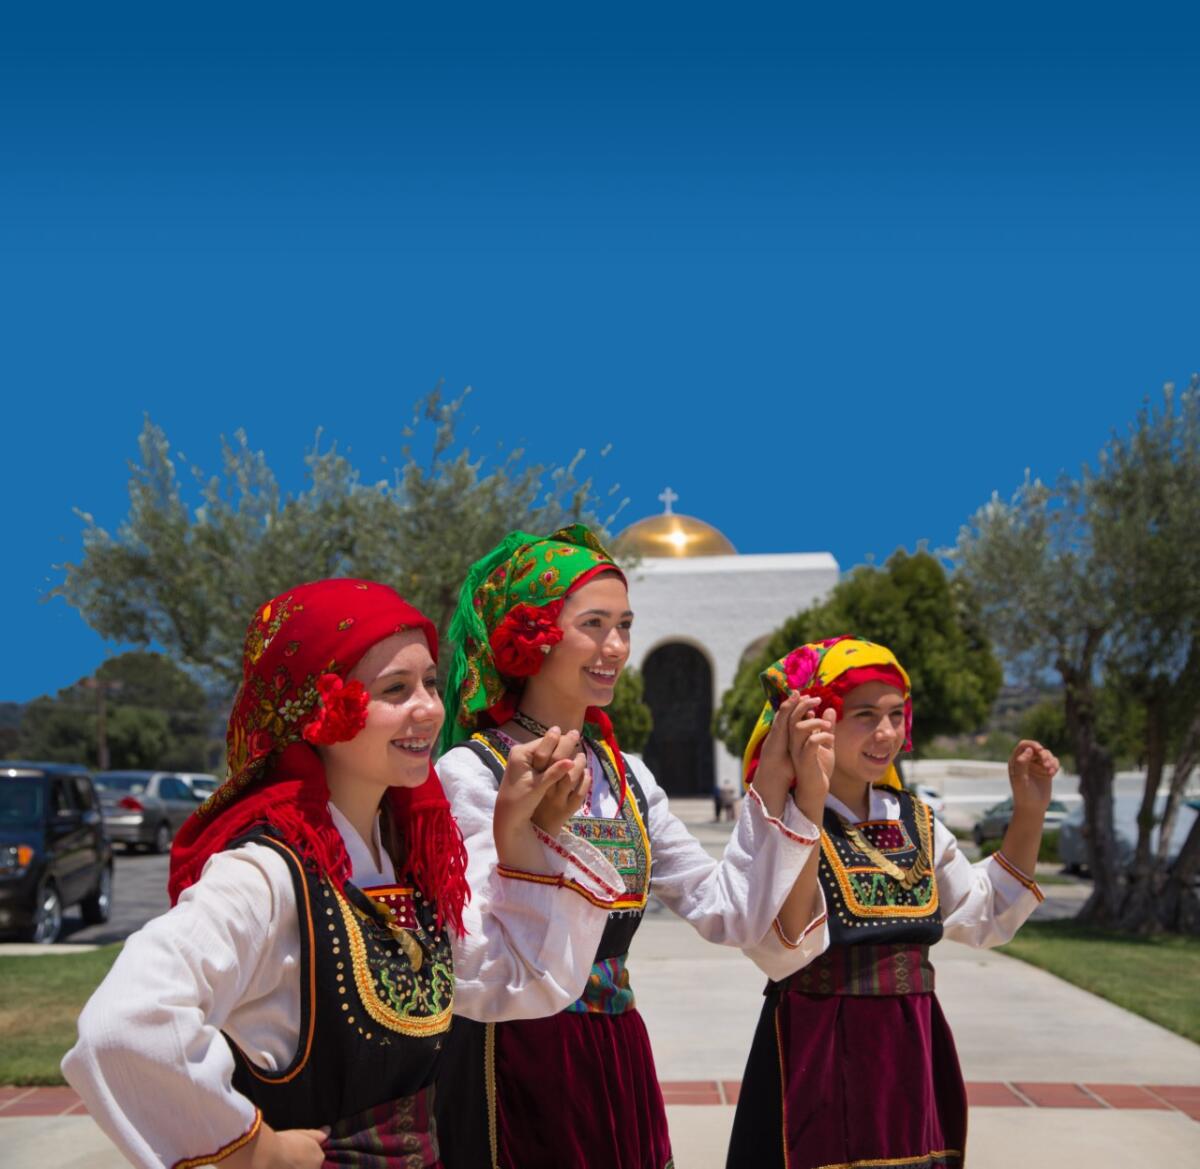 Greek dancers will be among the entertainment at the 41st Annual Cardiff Greek Festival on Sept. 7 and 8.